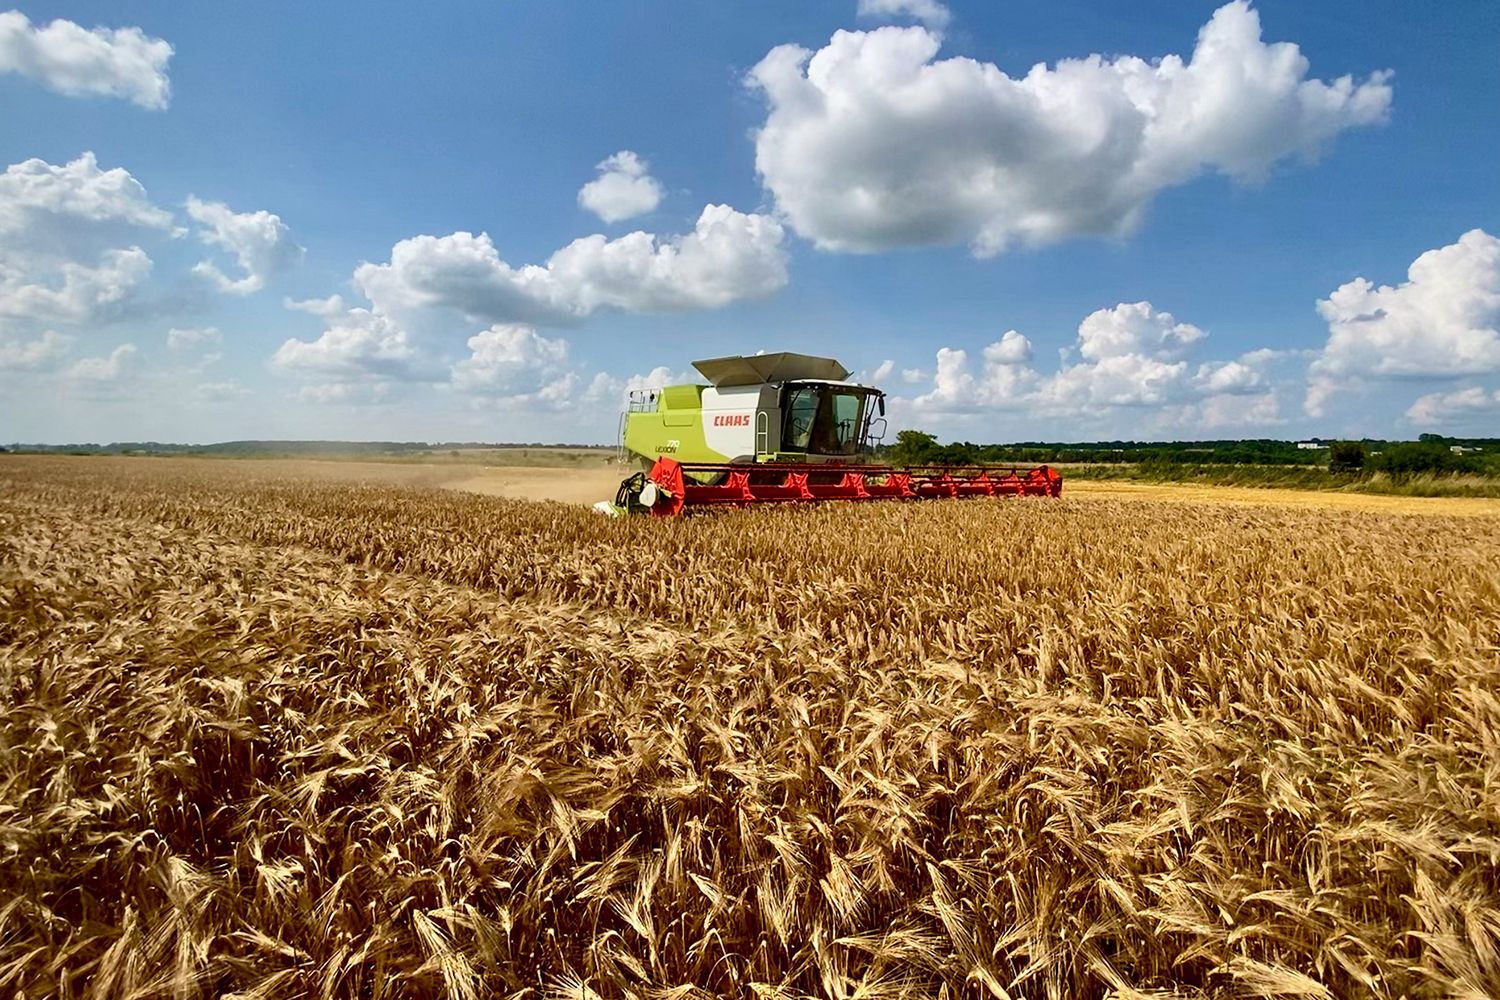 Claas combine harvester cutting barley in Continental Farmers Group field